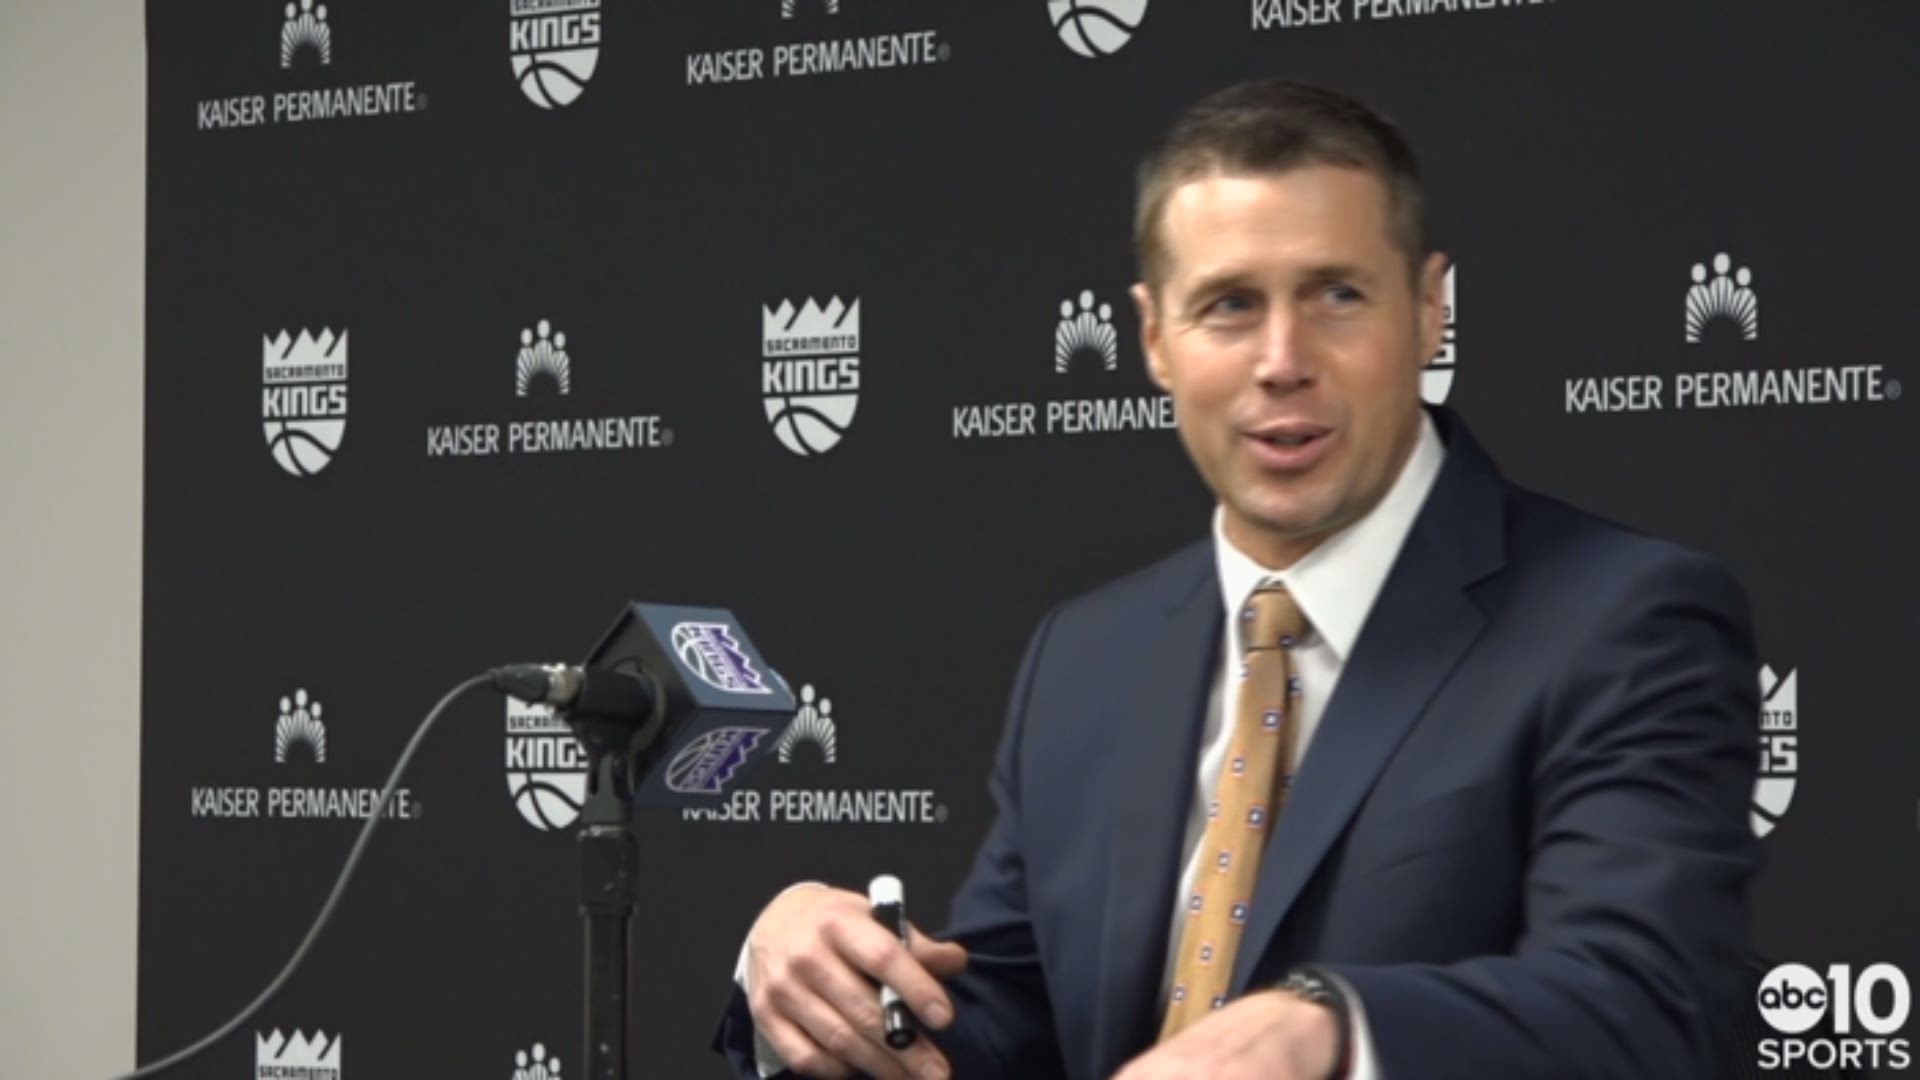 Kings head coach Dave Joerger praises his team's effort in Monday's victory at home over the Portland Trail Blazers, avenging the overtime loss to them a little more than two weeks ago, and looks ahead to the long road trip.